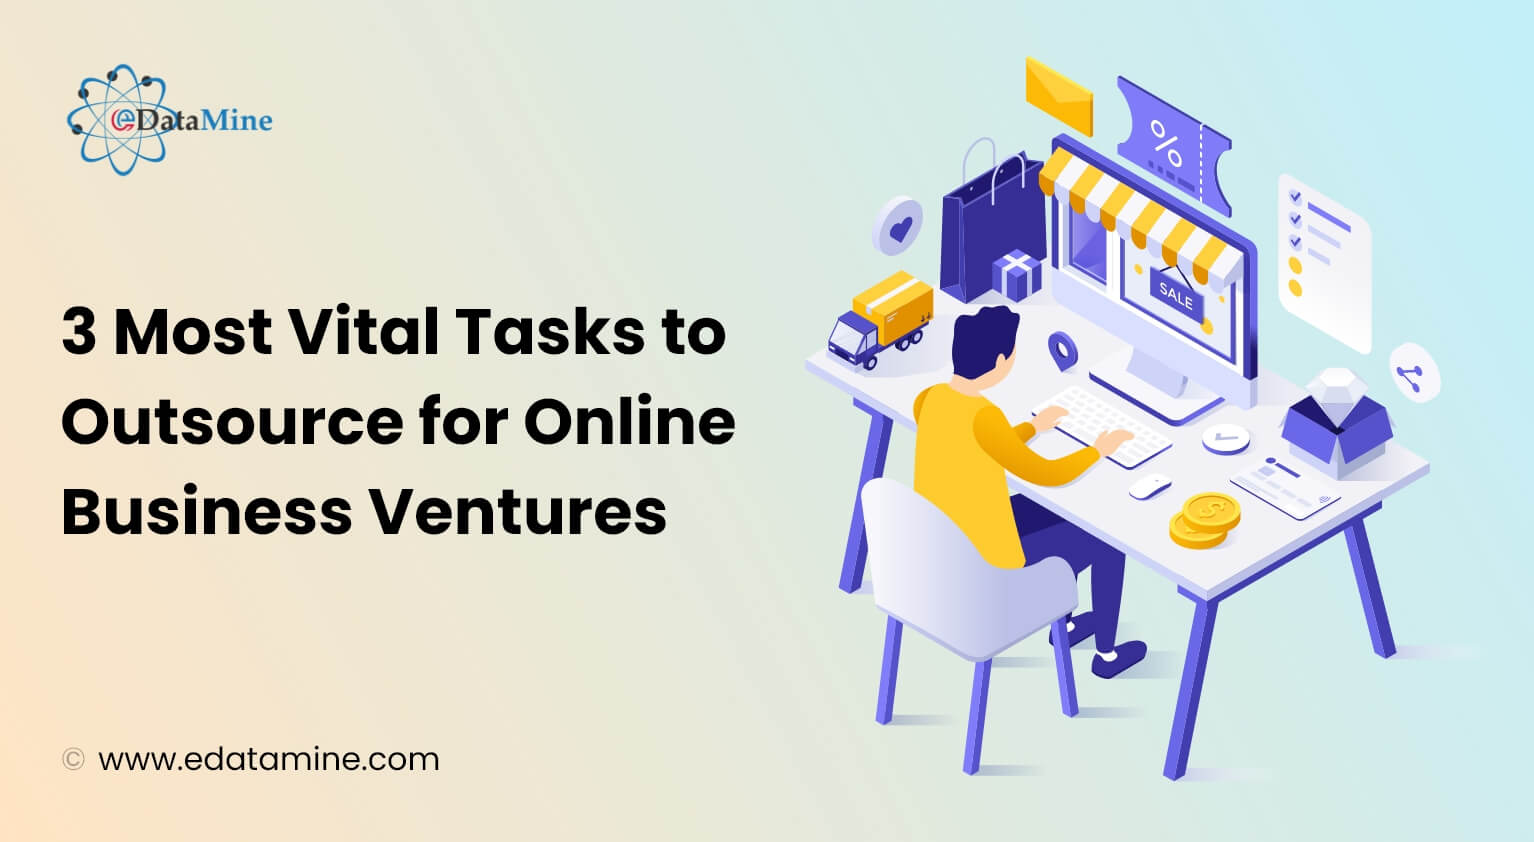 3 Most Vital Tasks to Outsource for Online Business Ventures